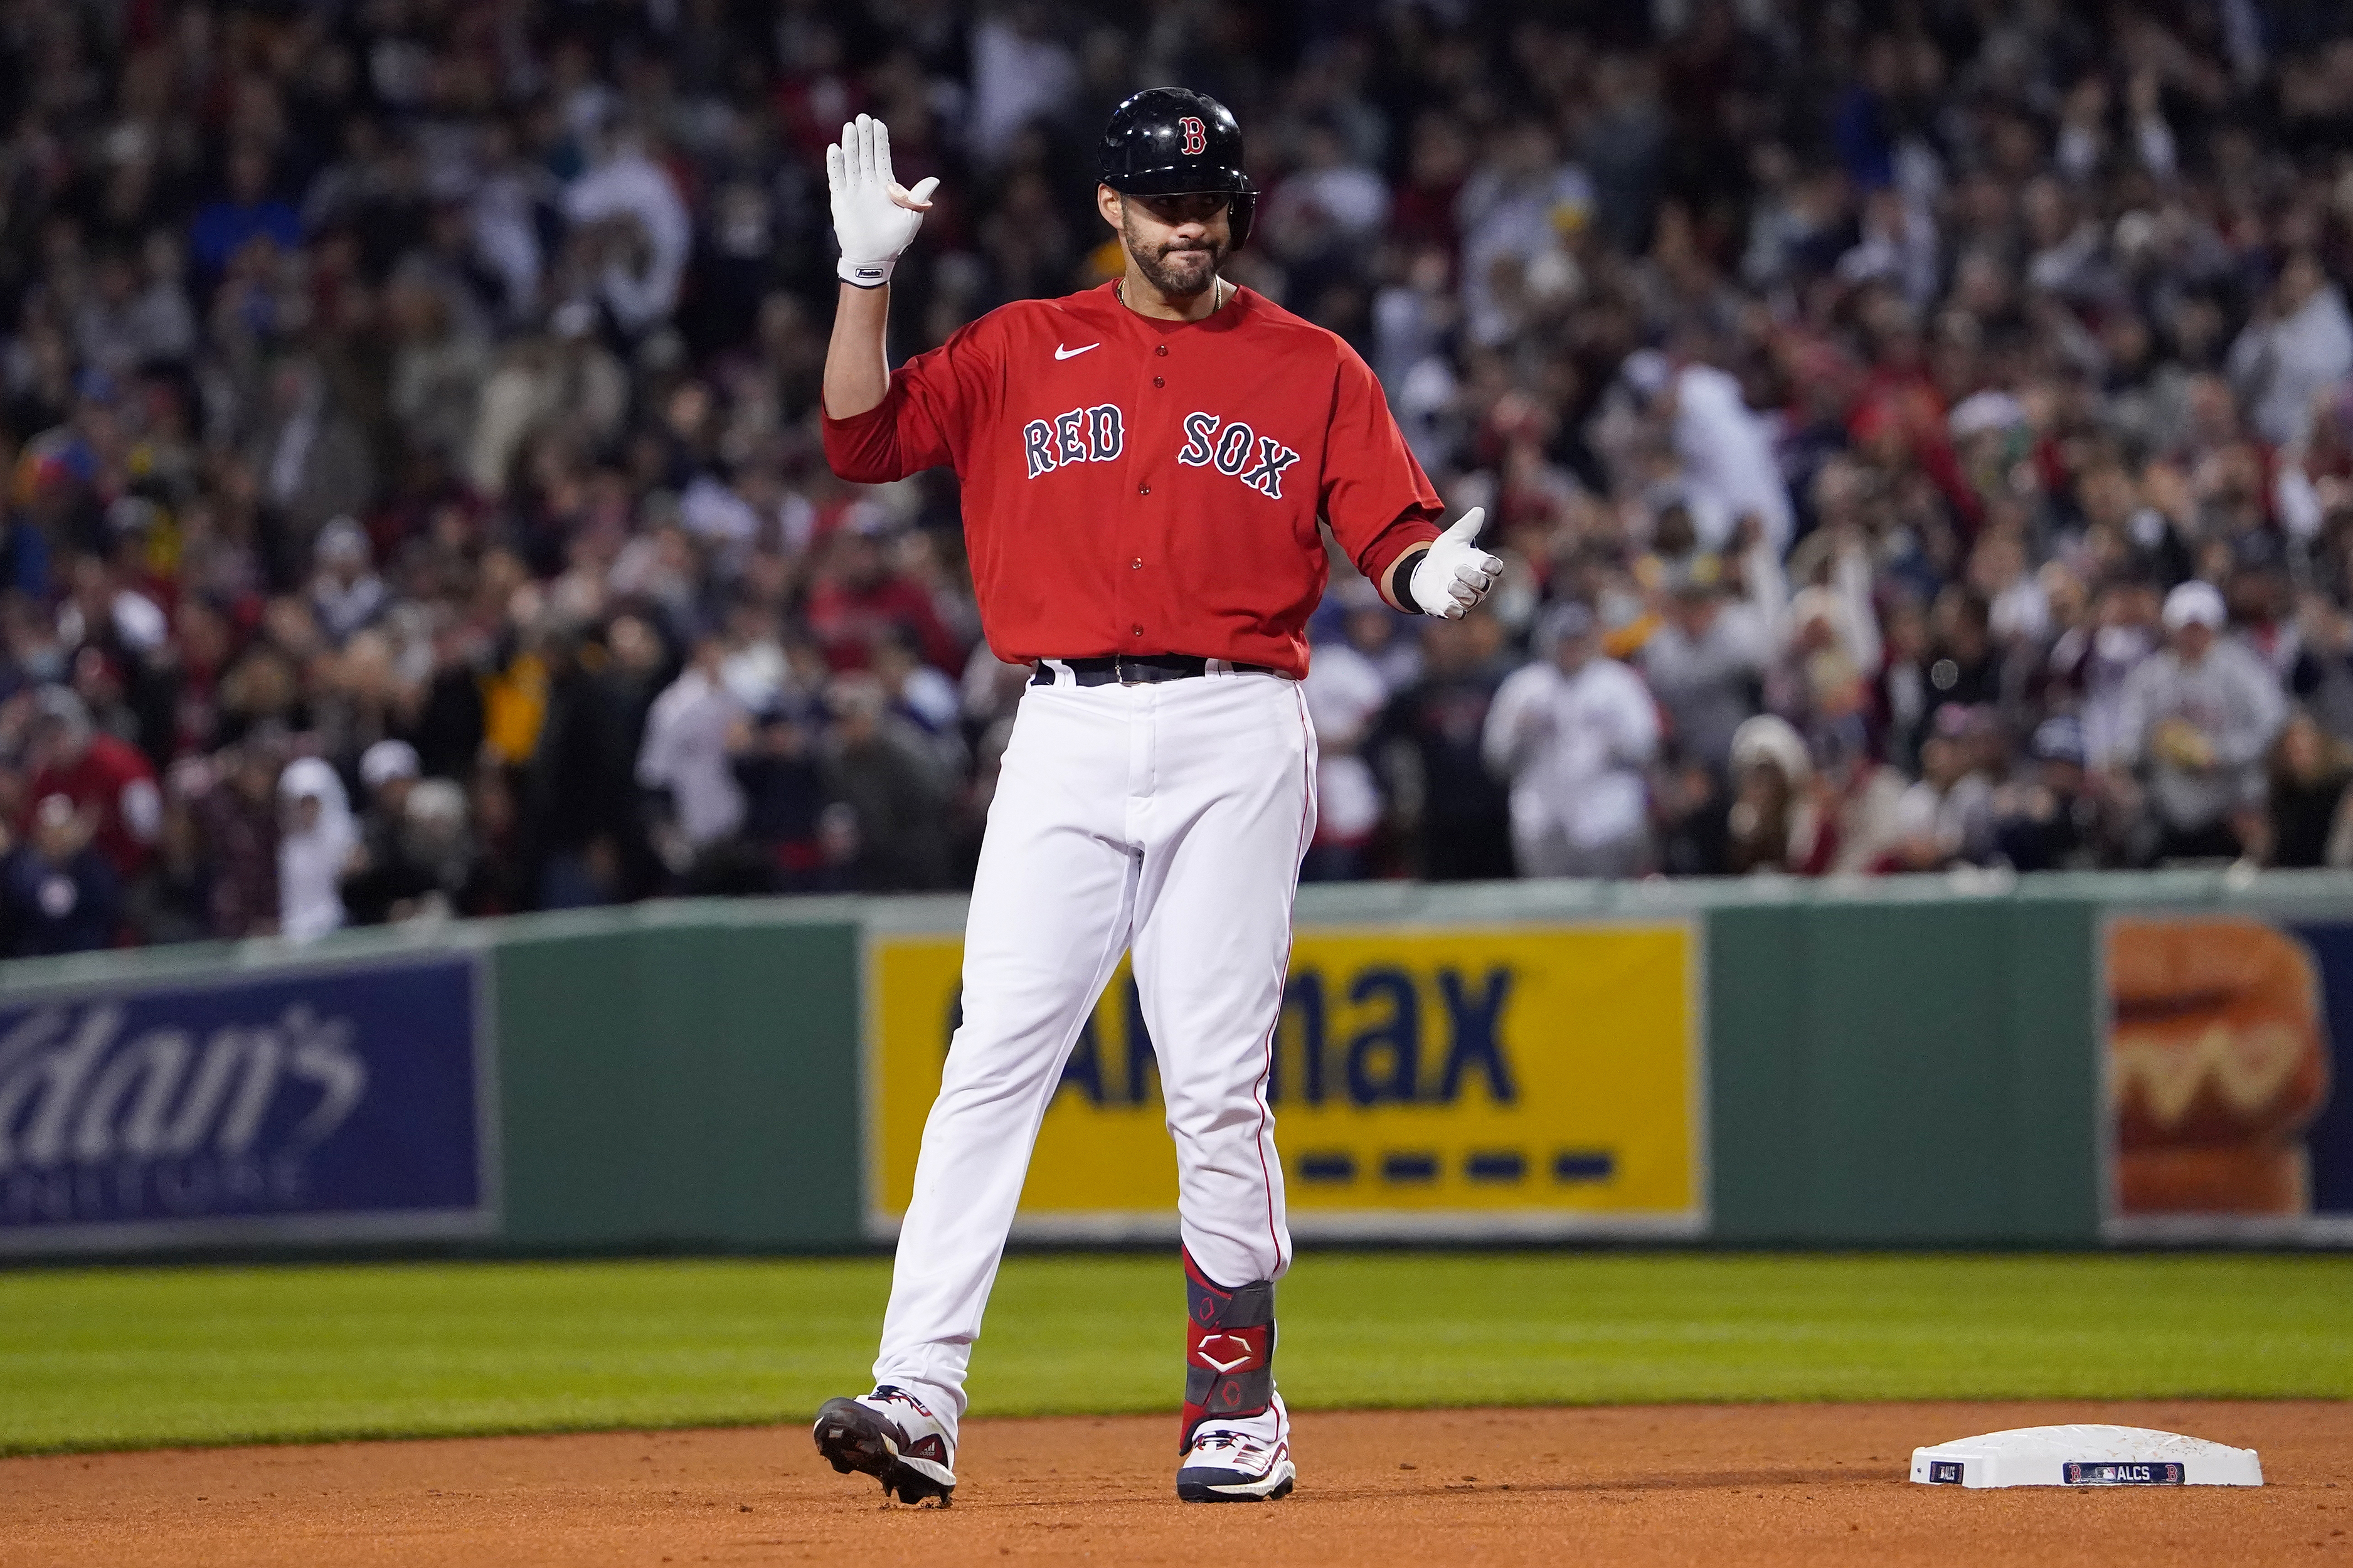 Now J.D. Martinez is facing his own version of The Decision - The